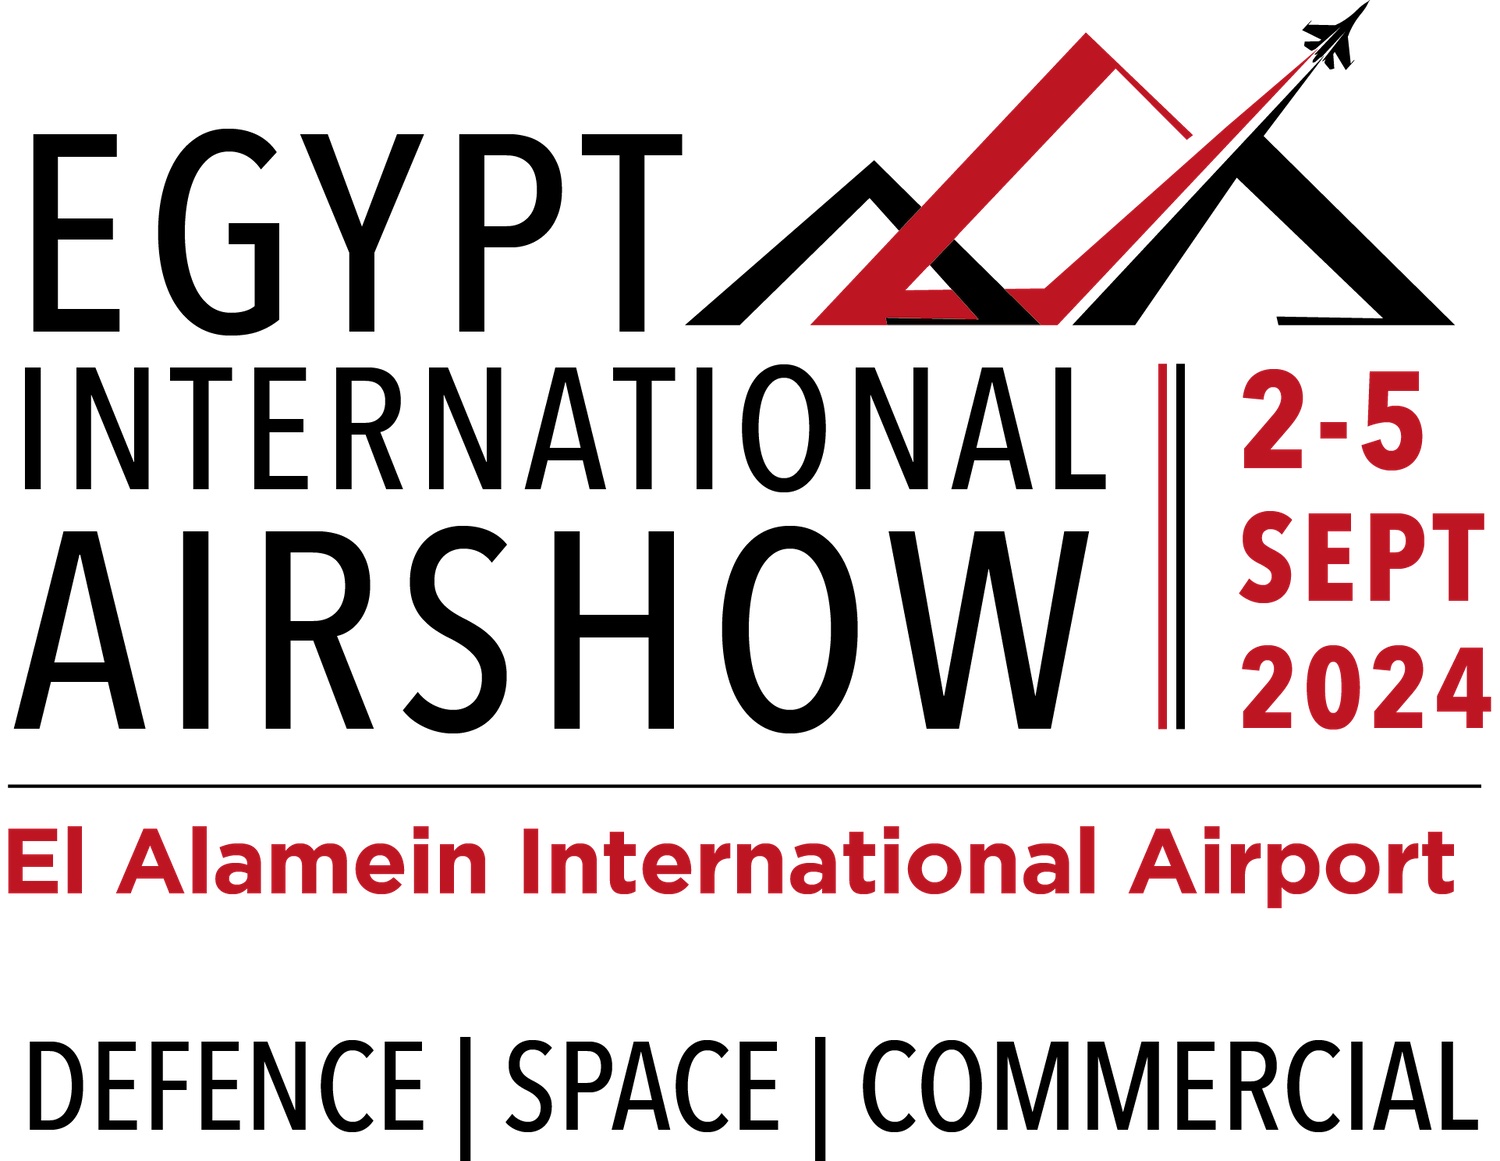 Explore Commercial Aviation Opportunities Across Africa and the Middle East at Egypt International Airshow 2024